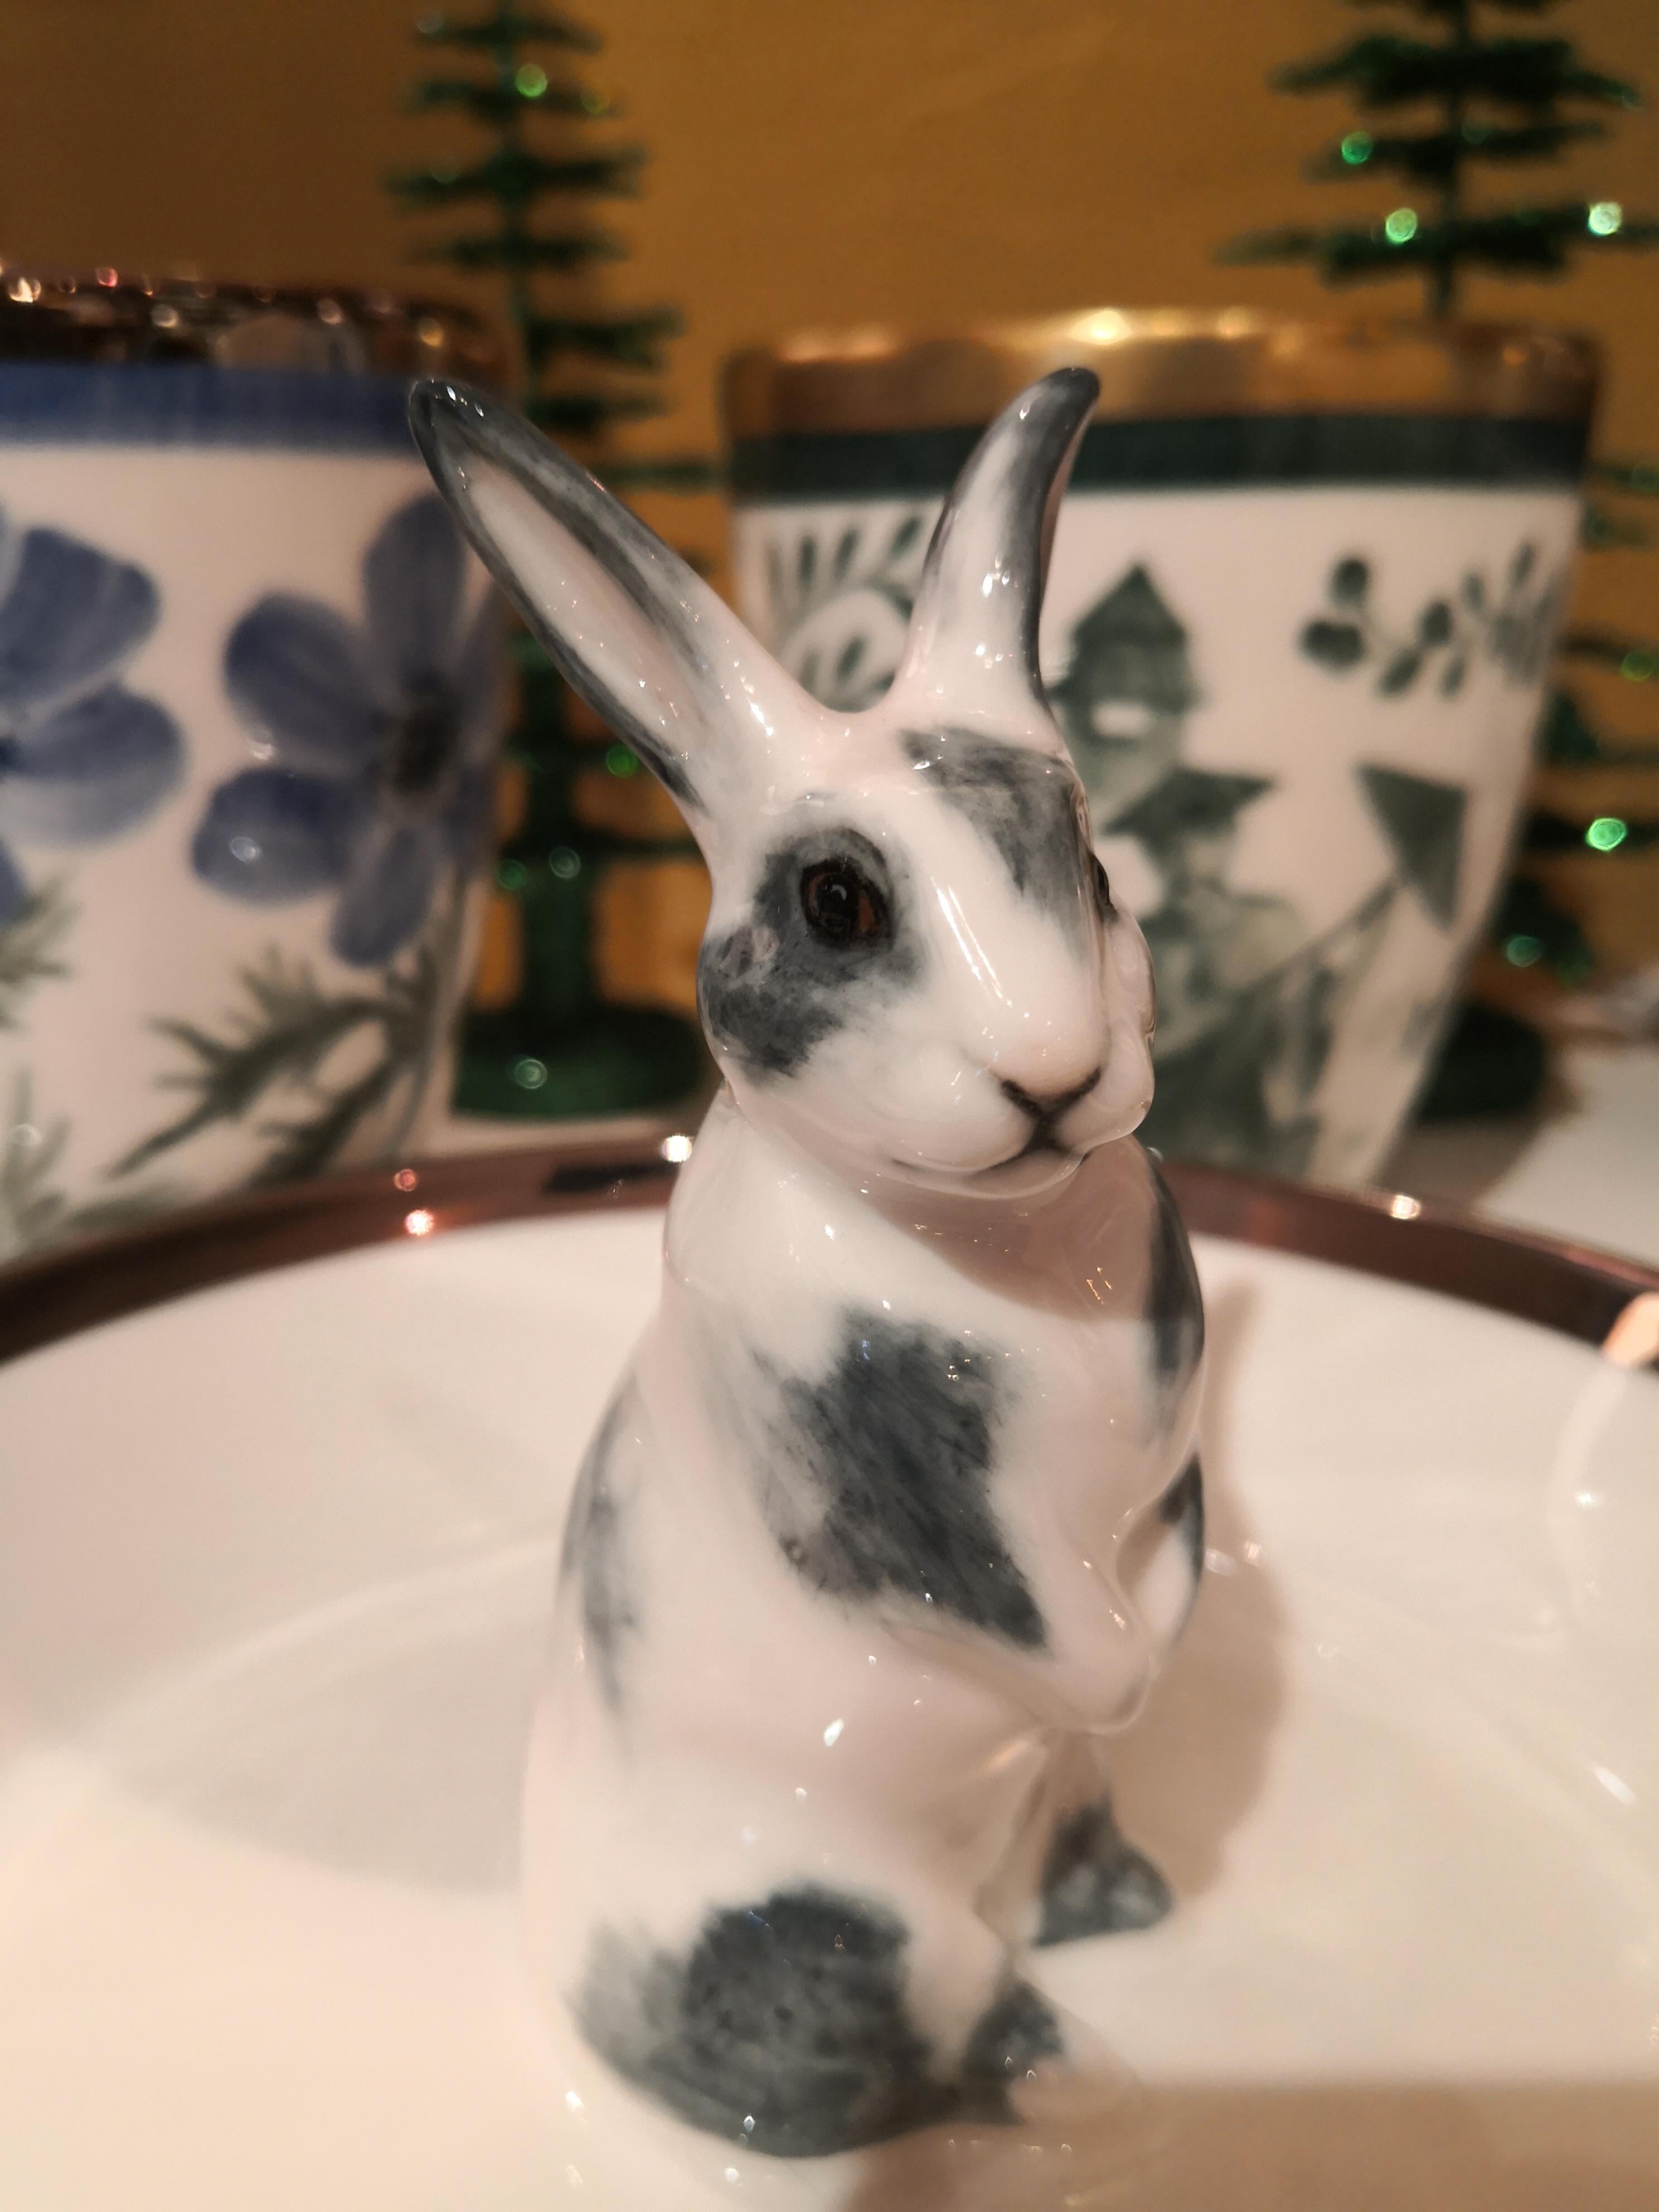 Completely handmade porcelain bowl with a hands-free naturalistic painted bunny figure with grey spots in country style. The bunny is sitting in the middle of the bowl for decorating nuts or sweets around. Rimmed with a platinum line. Handmade in